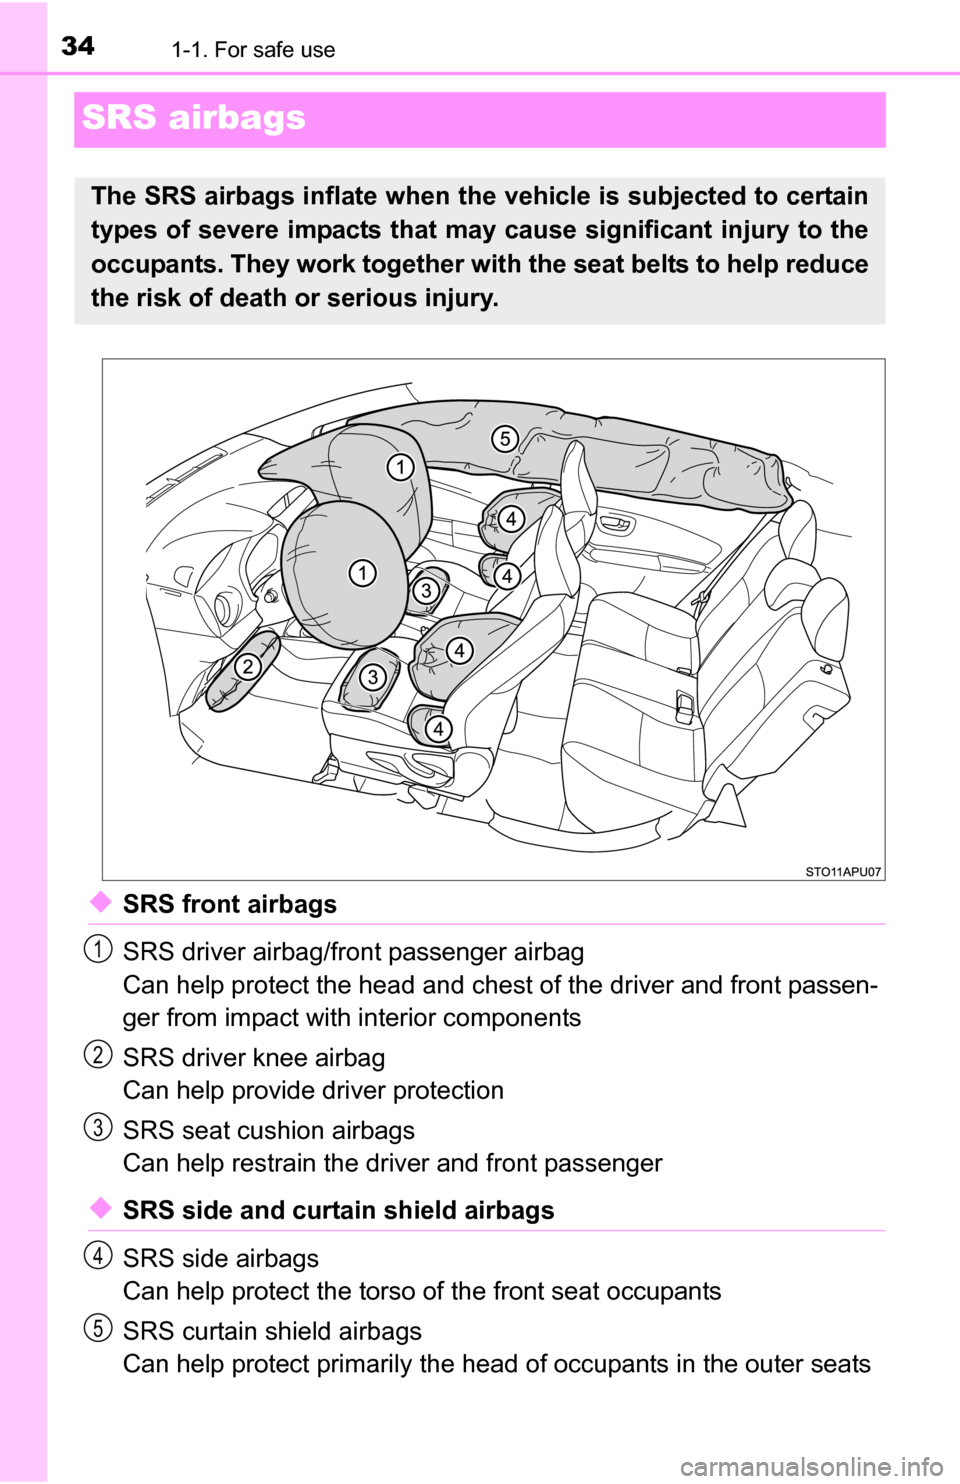 TOYOTA YARIS 2016 3.G Owners Guide 341-1. For safe use
SRS airbags
◆SRS front airbags
SRS driver airbag/front passenger airbag
Can help protect the head and chest of the driver and front passen-
ger from impact with interior componen